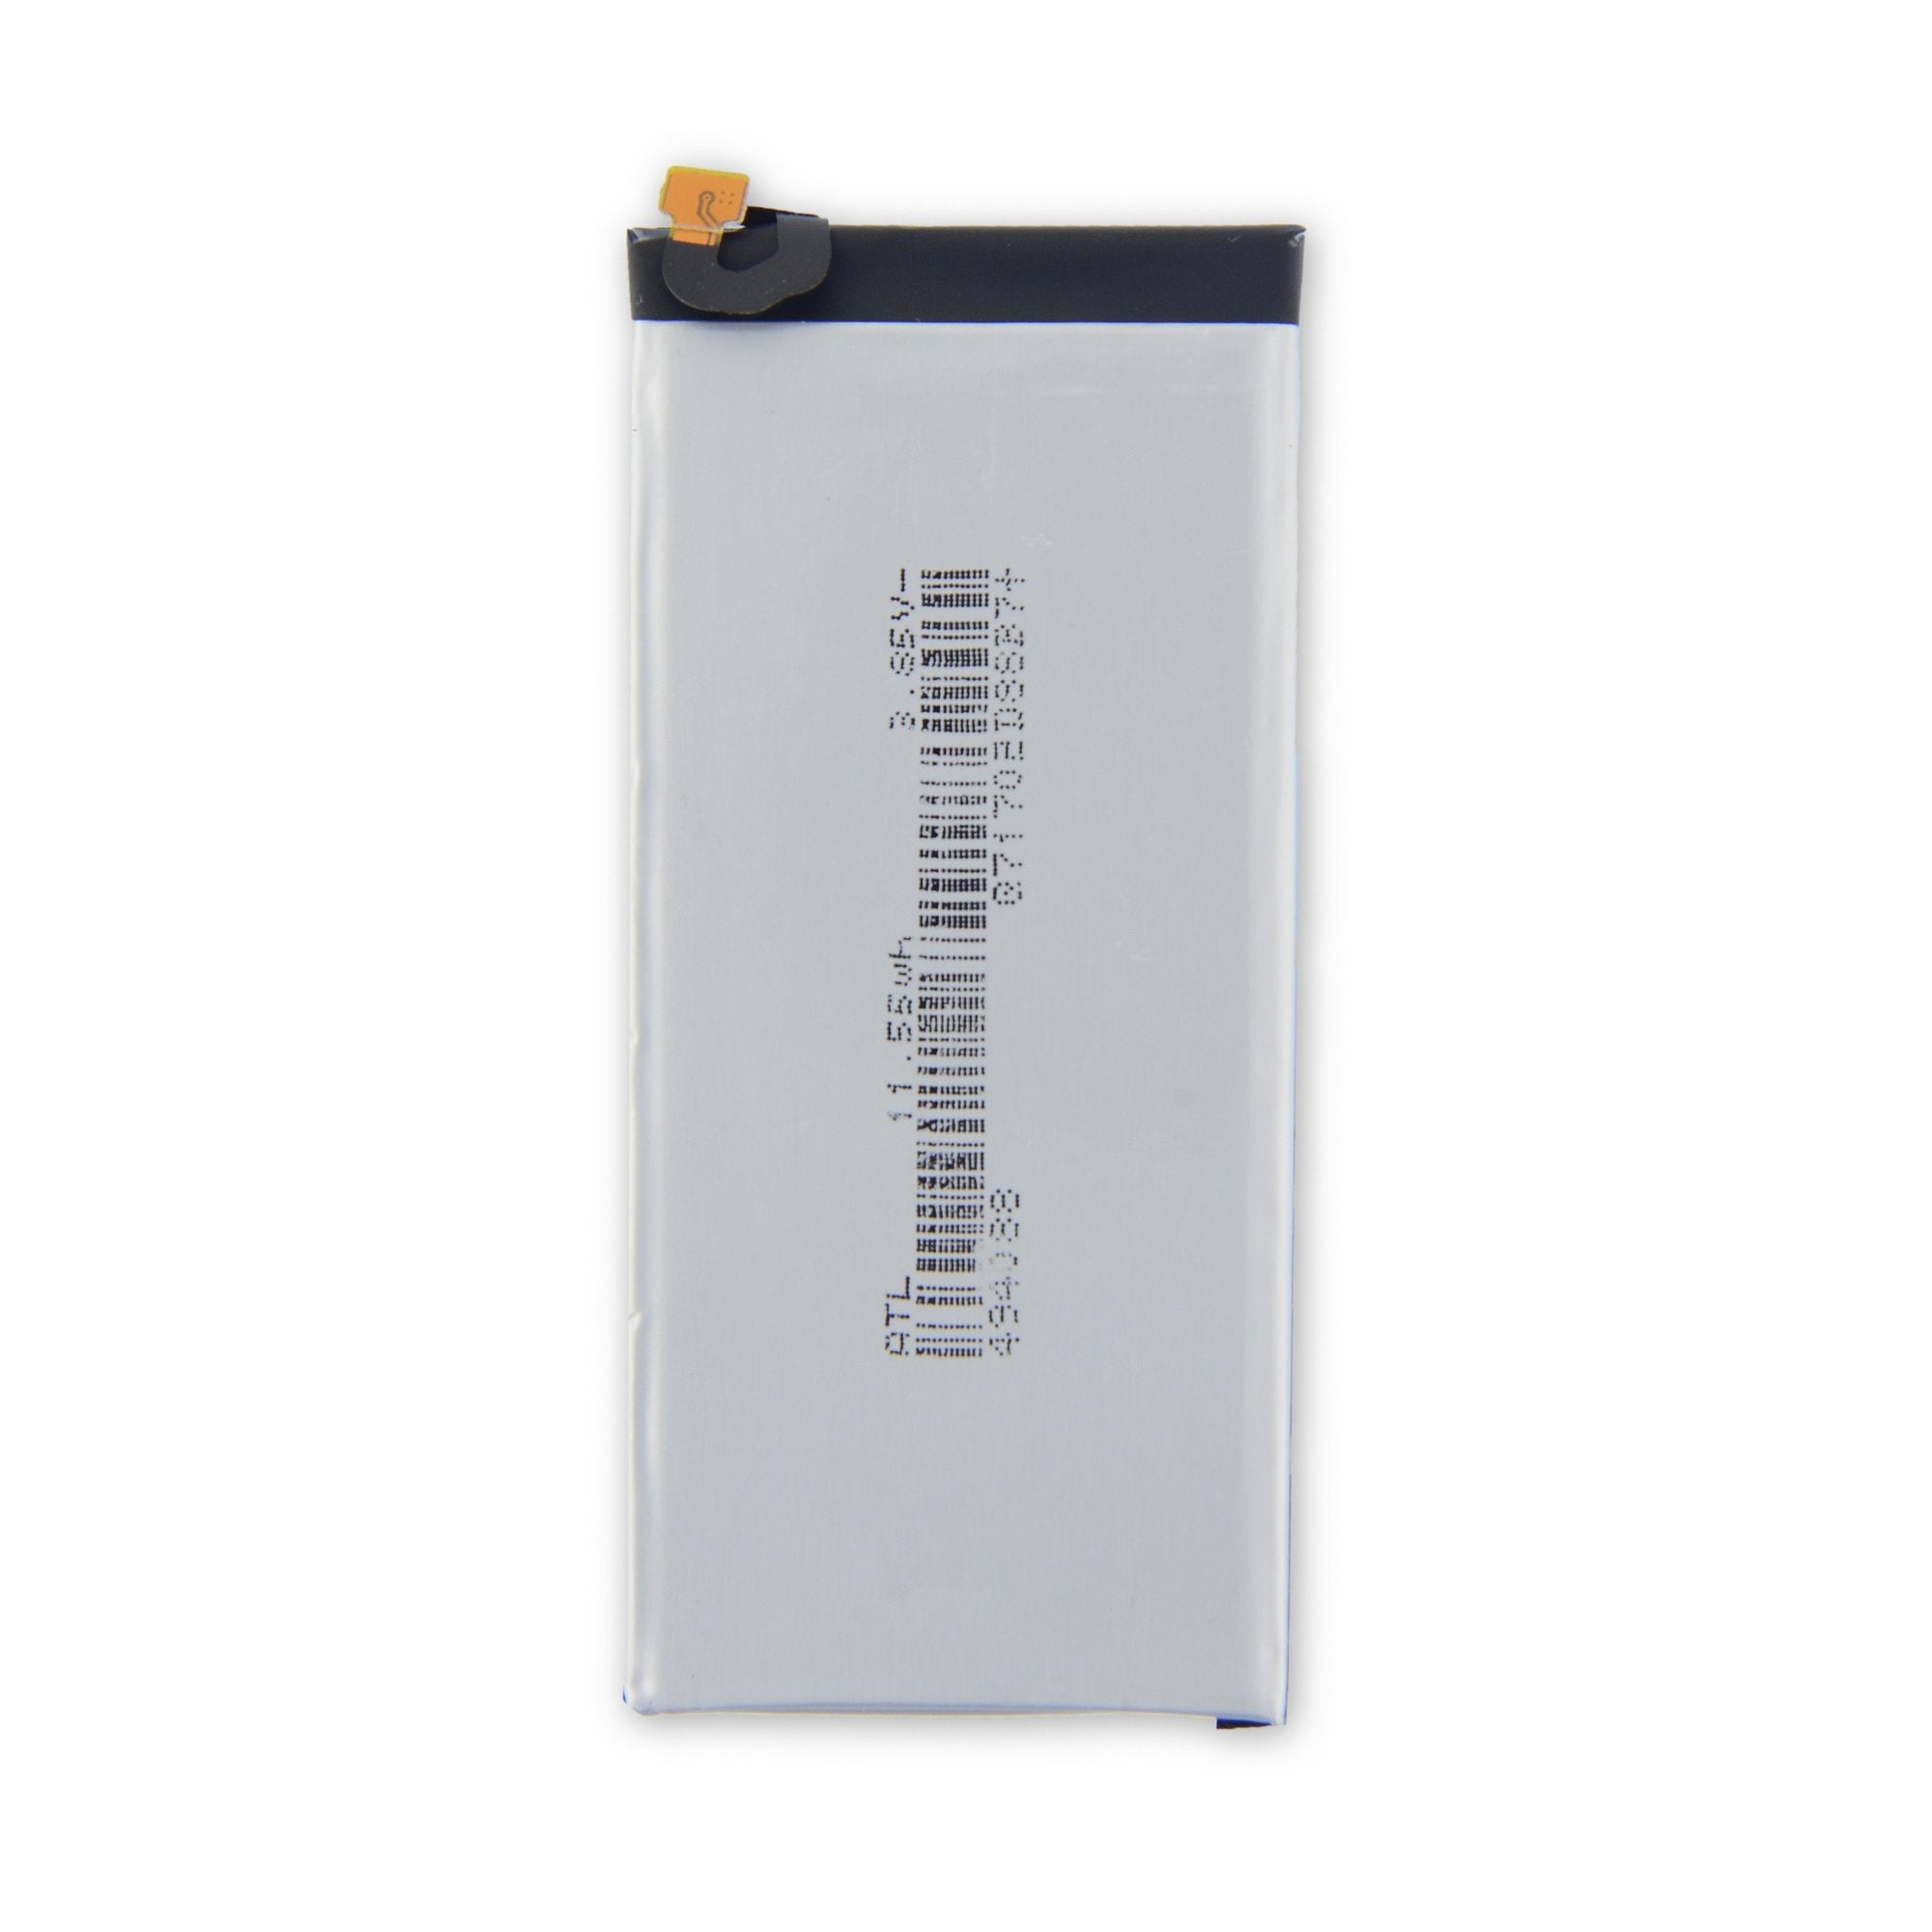 Galaxy A5 (2017) Battery New Part Only